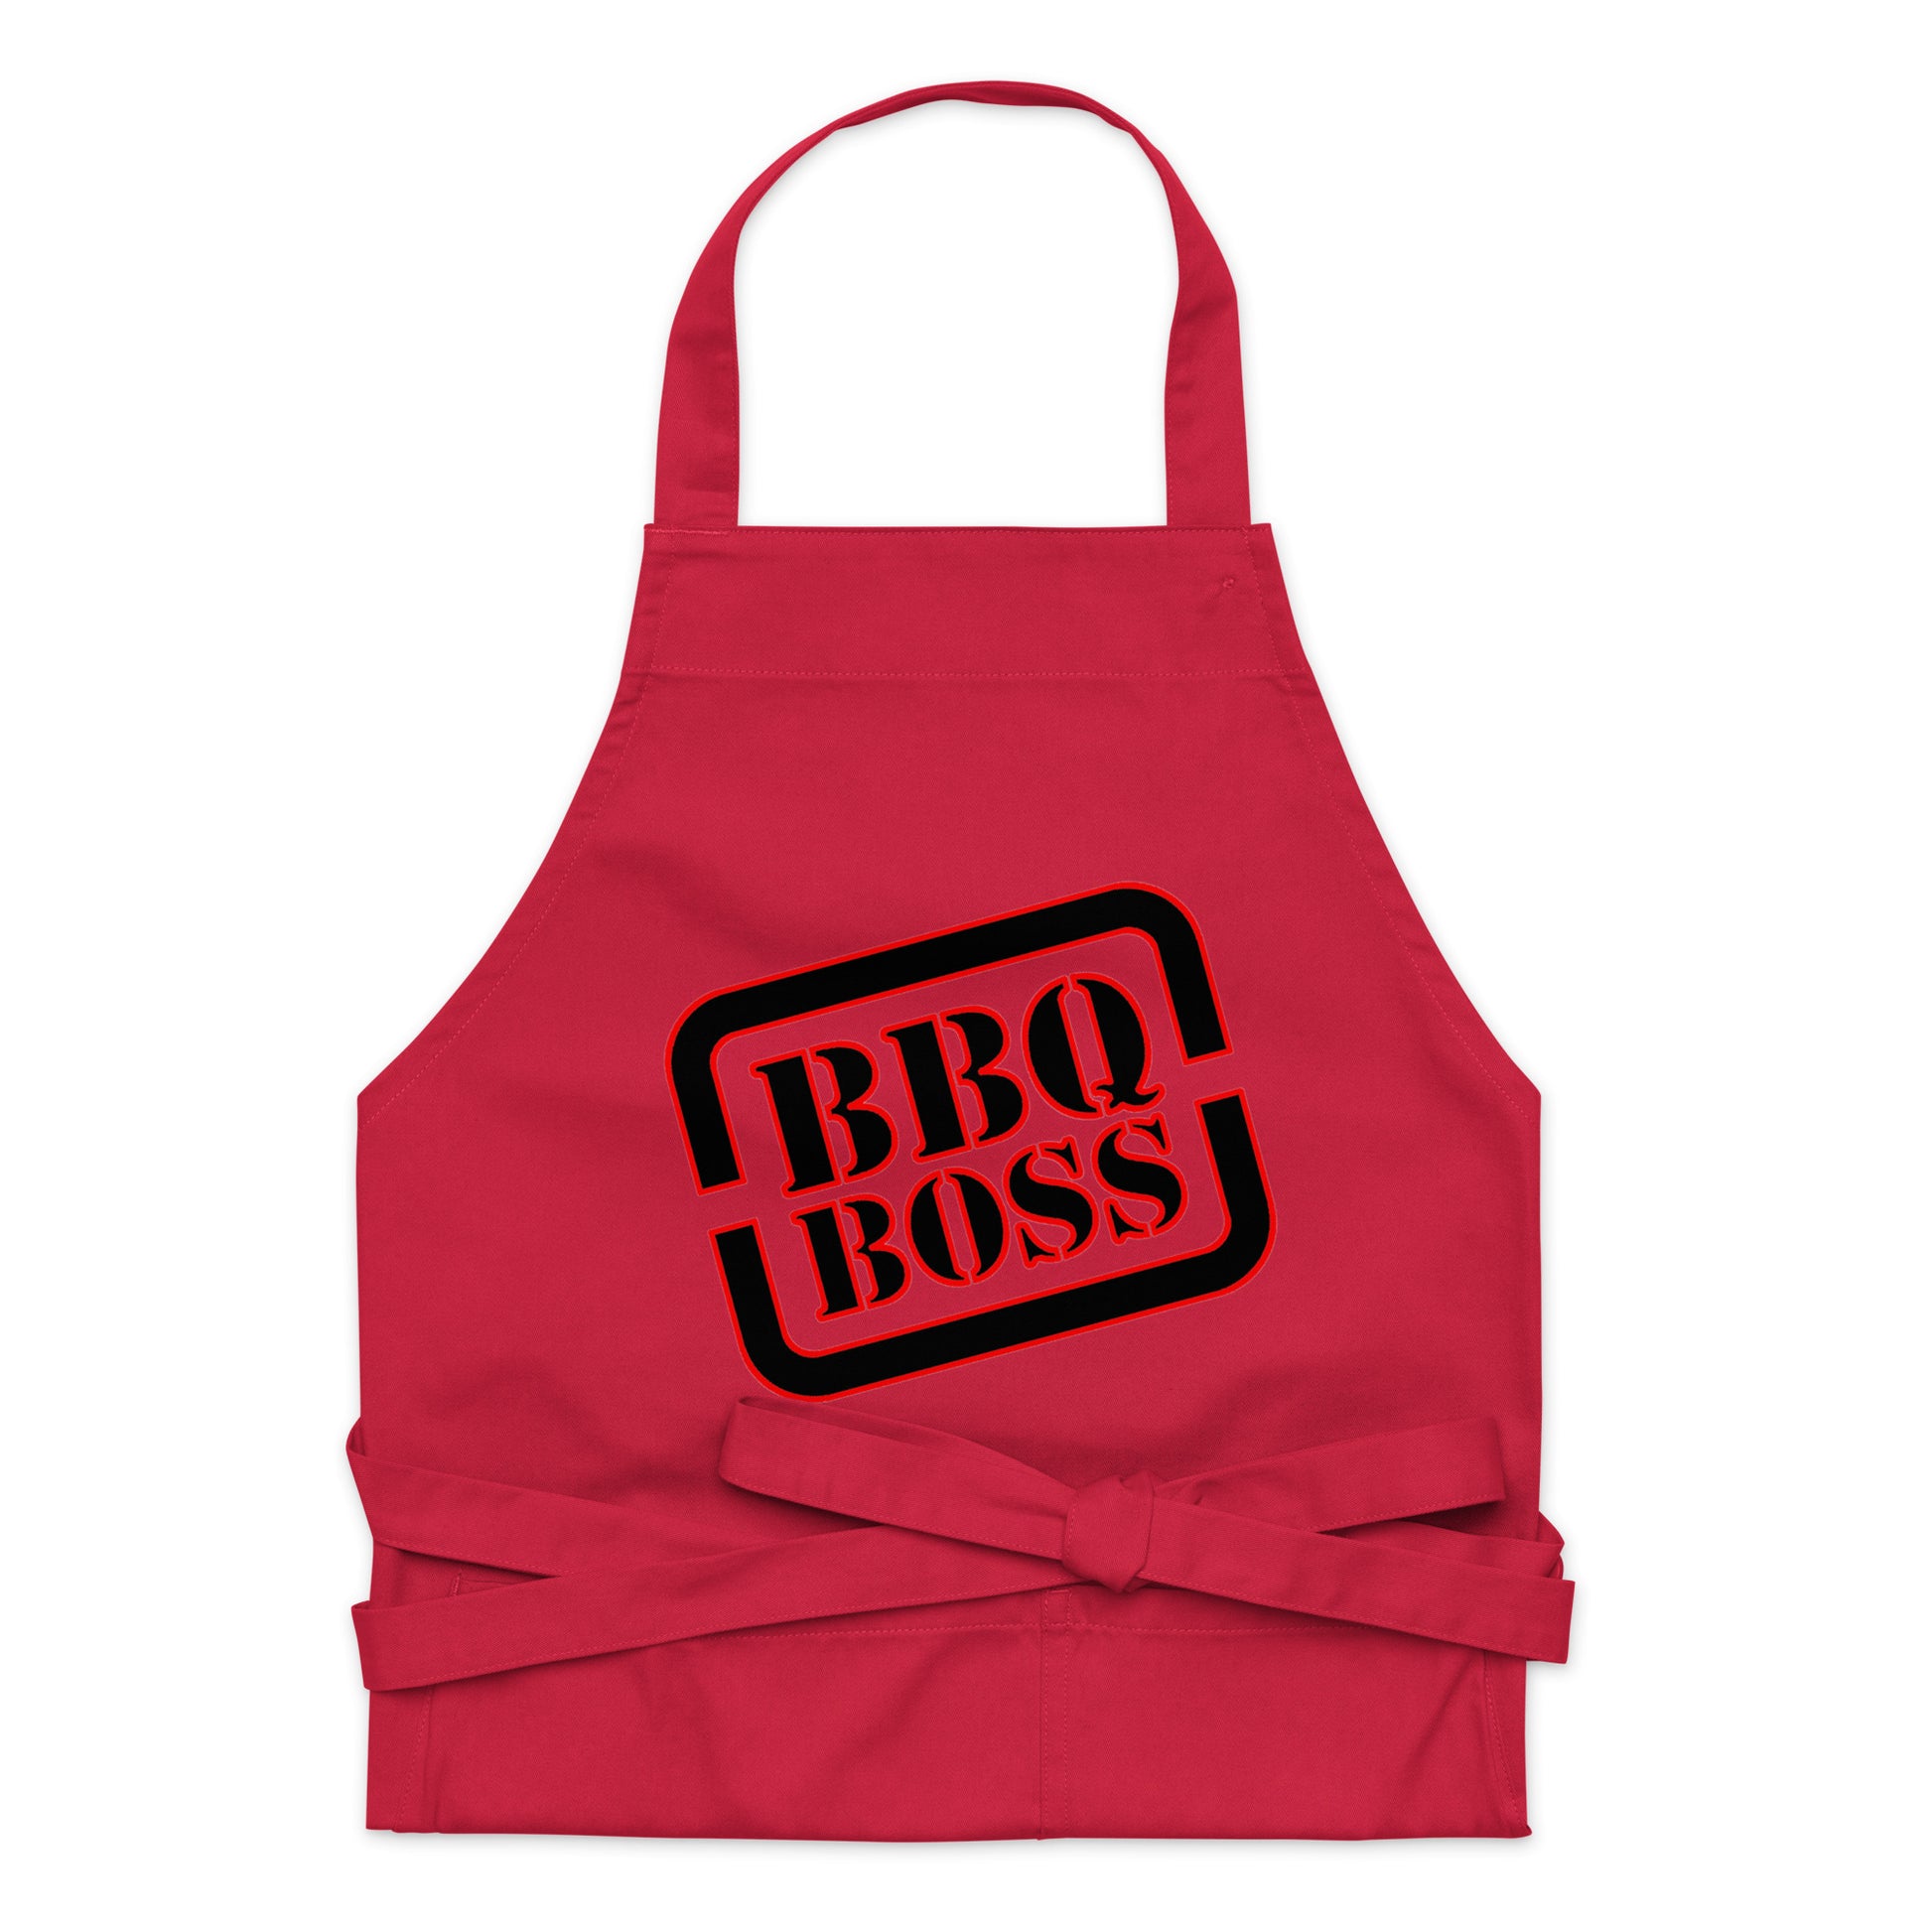 red apron with text "BBQ BOSS"